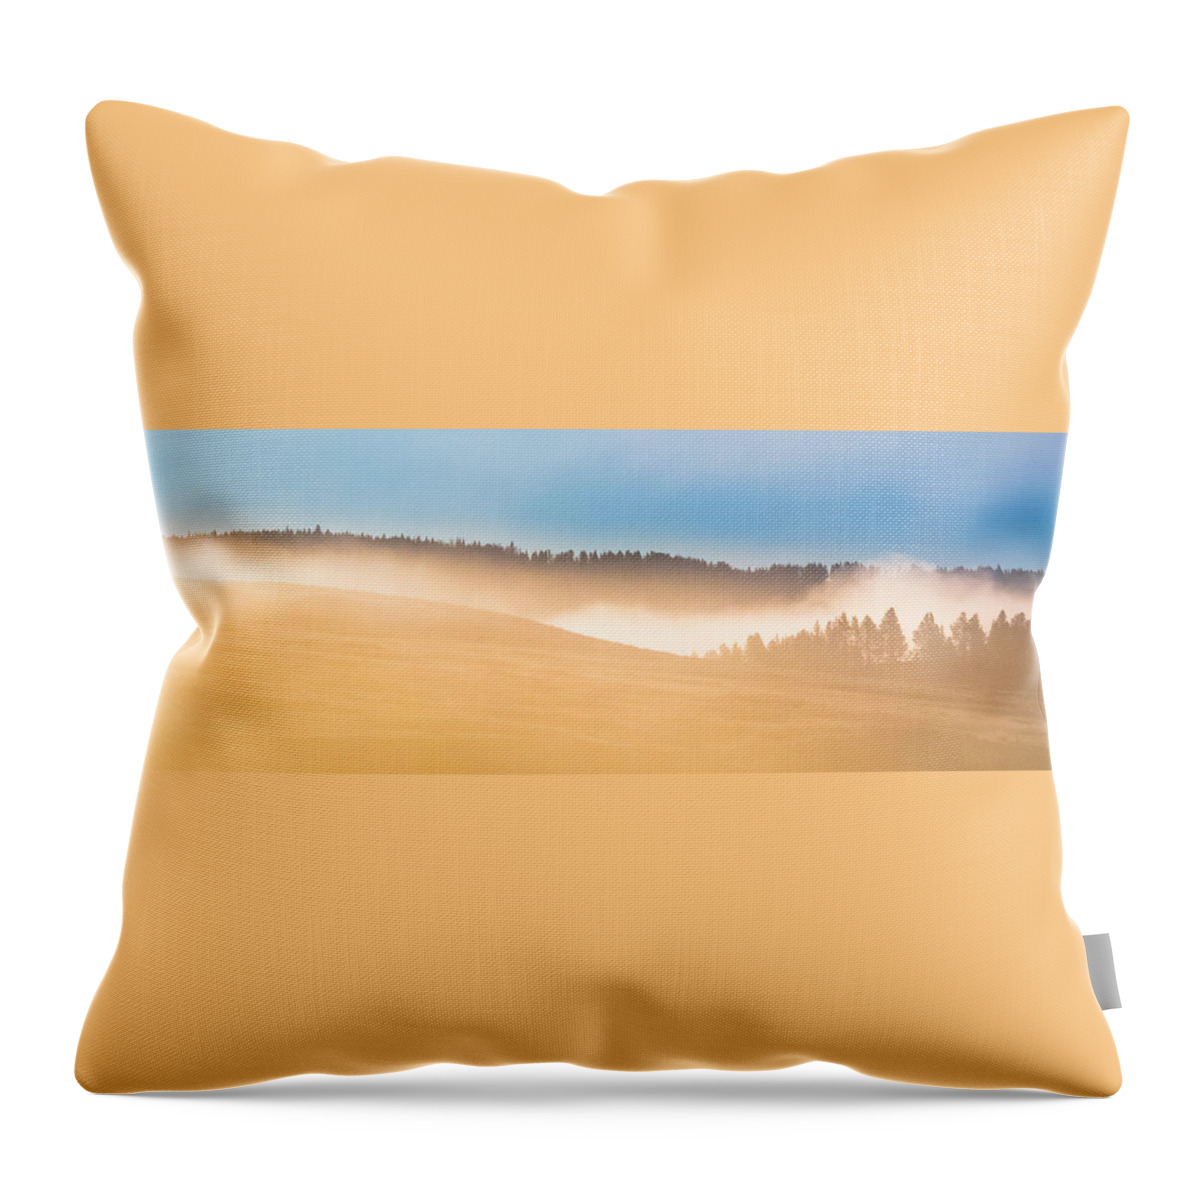  Throw Pillow featuring the photograph Misty Yellowstone  by Lars Lentz